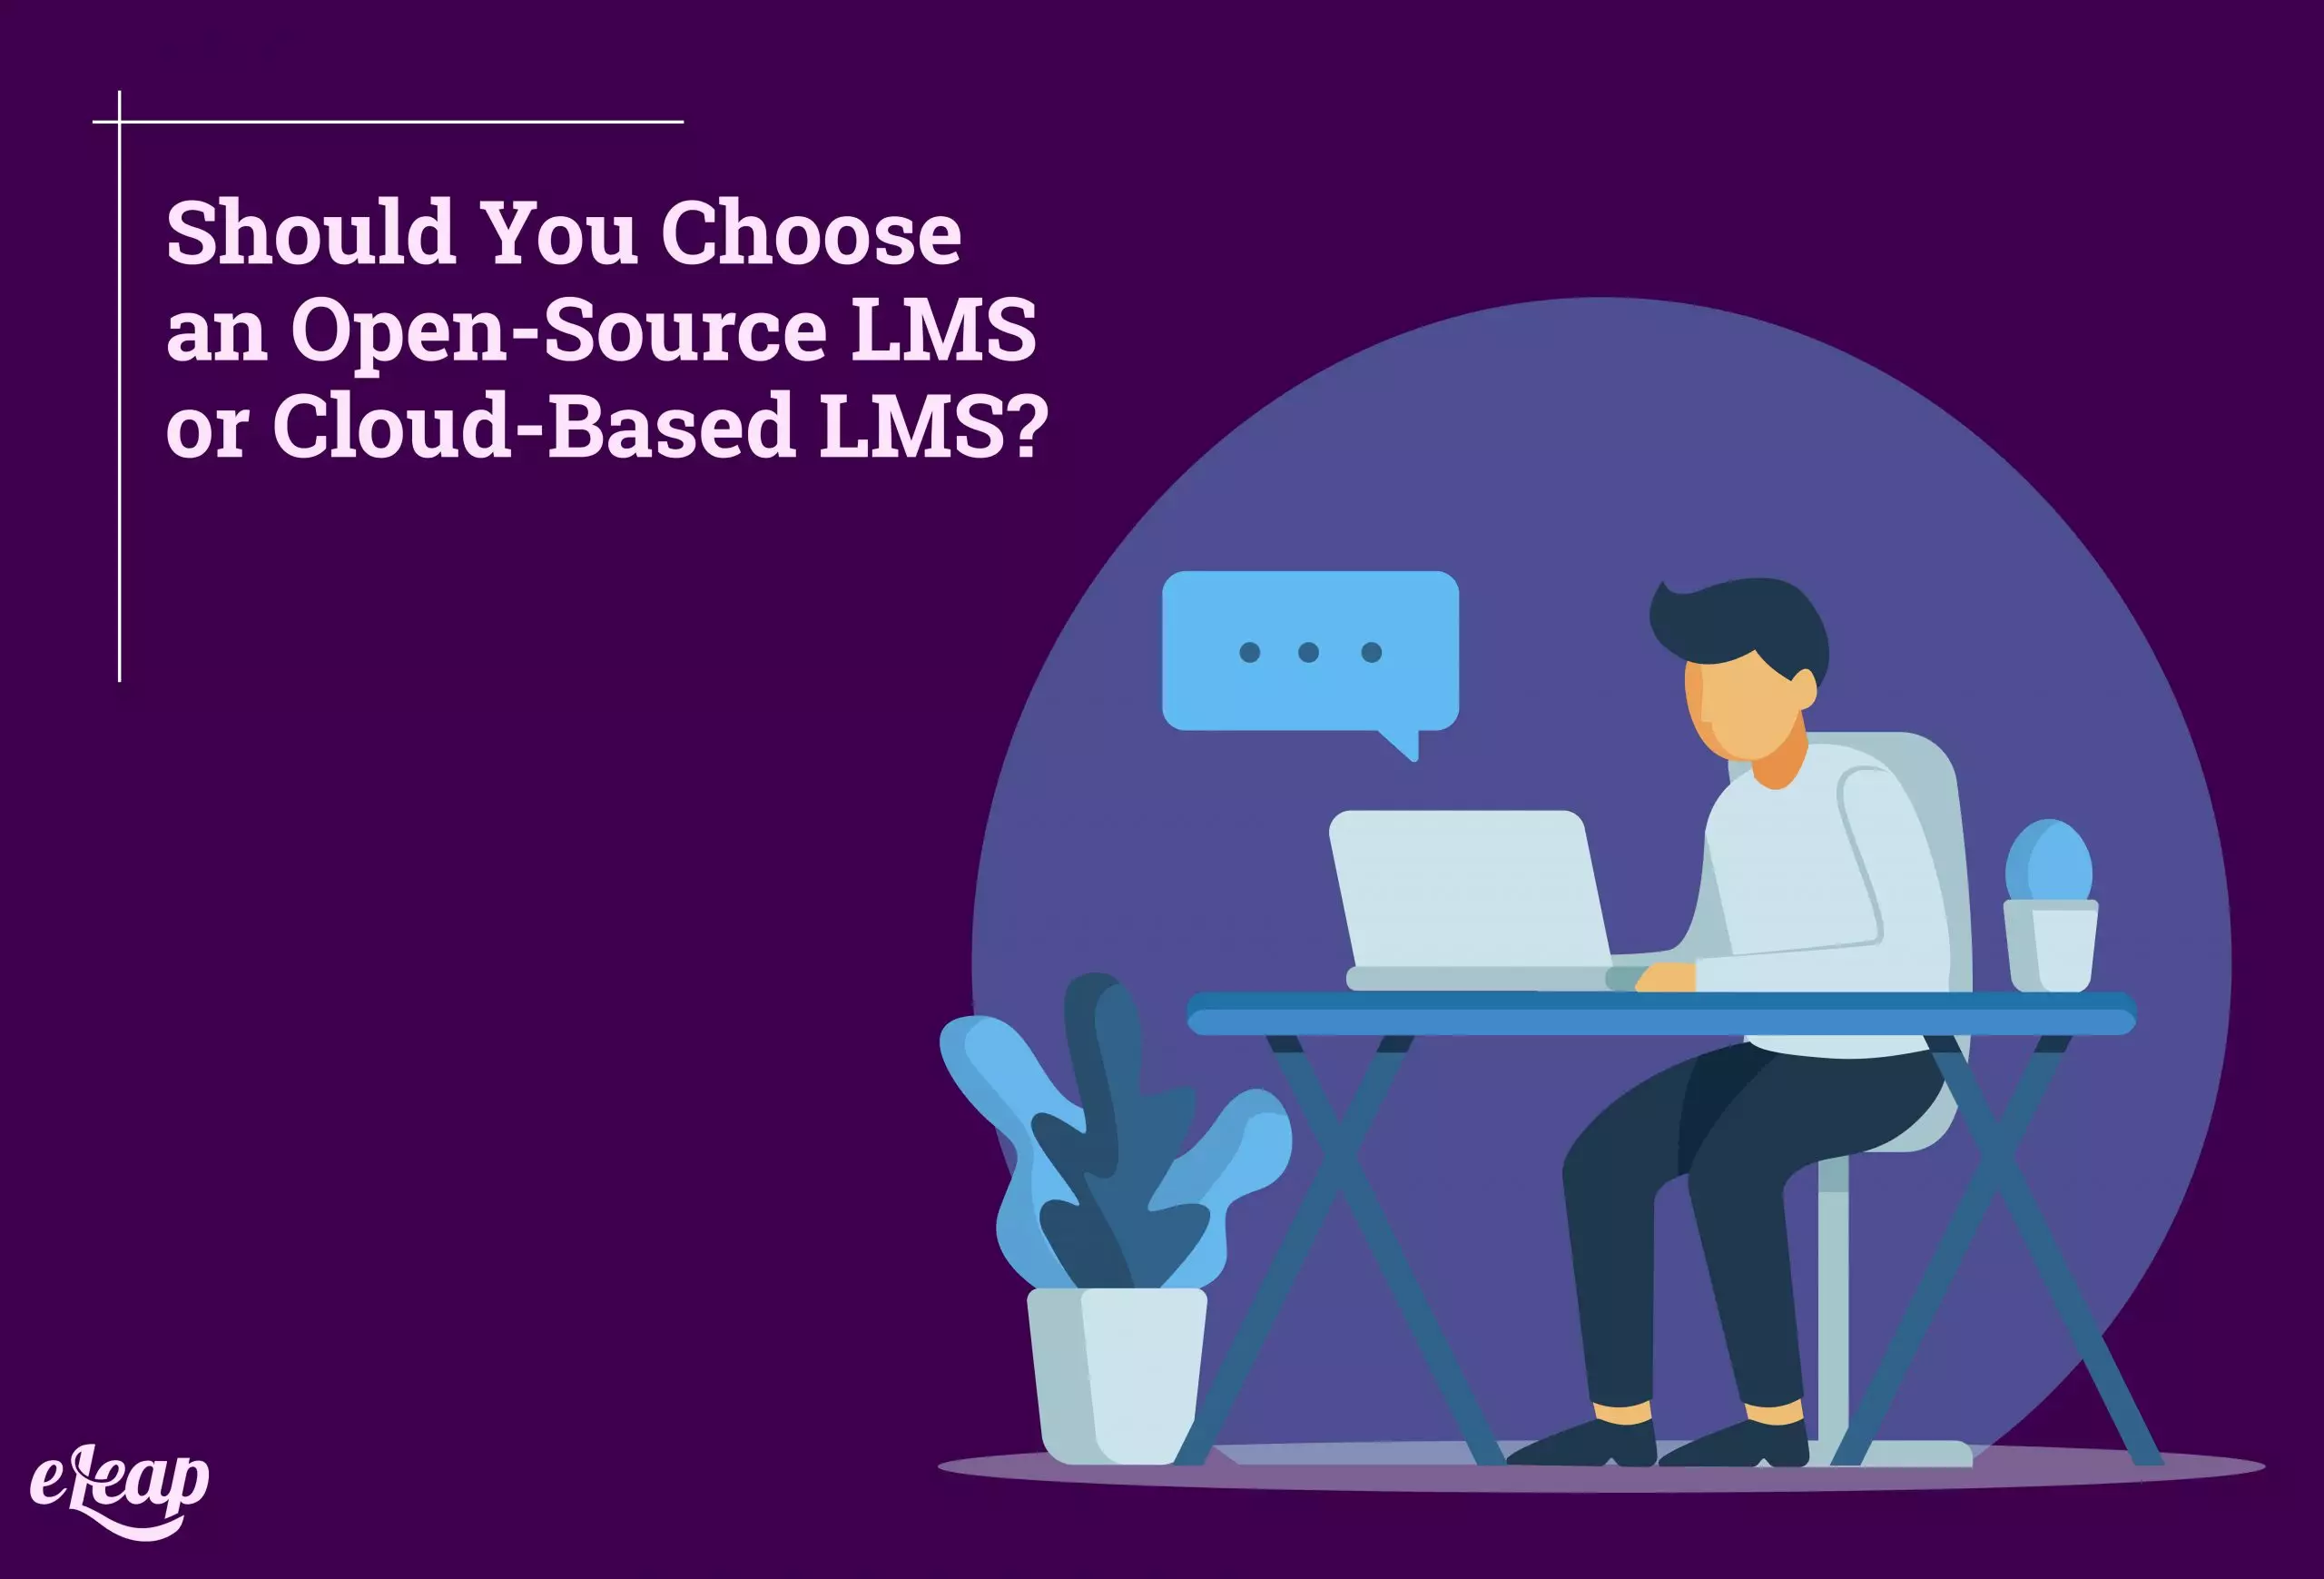 Should You Choose an Open-Source LMS or Cloud-Based LMS?